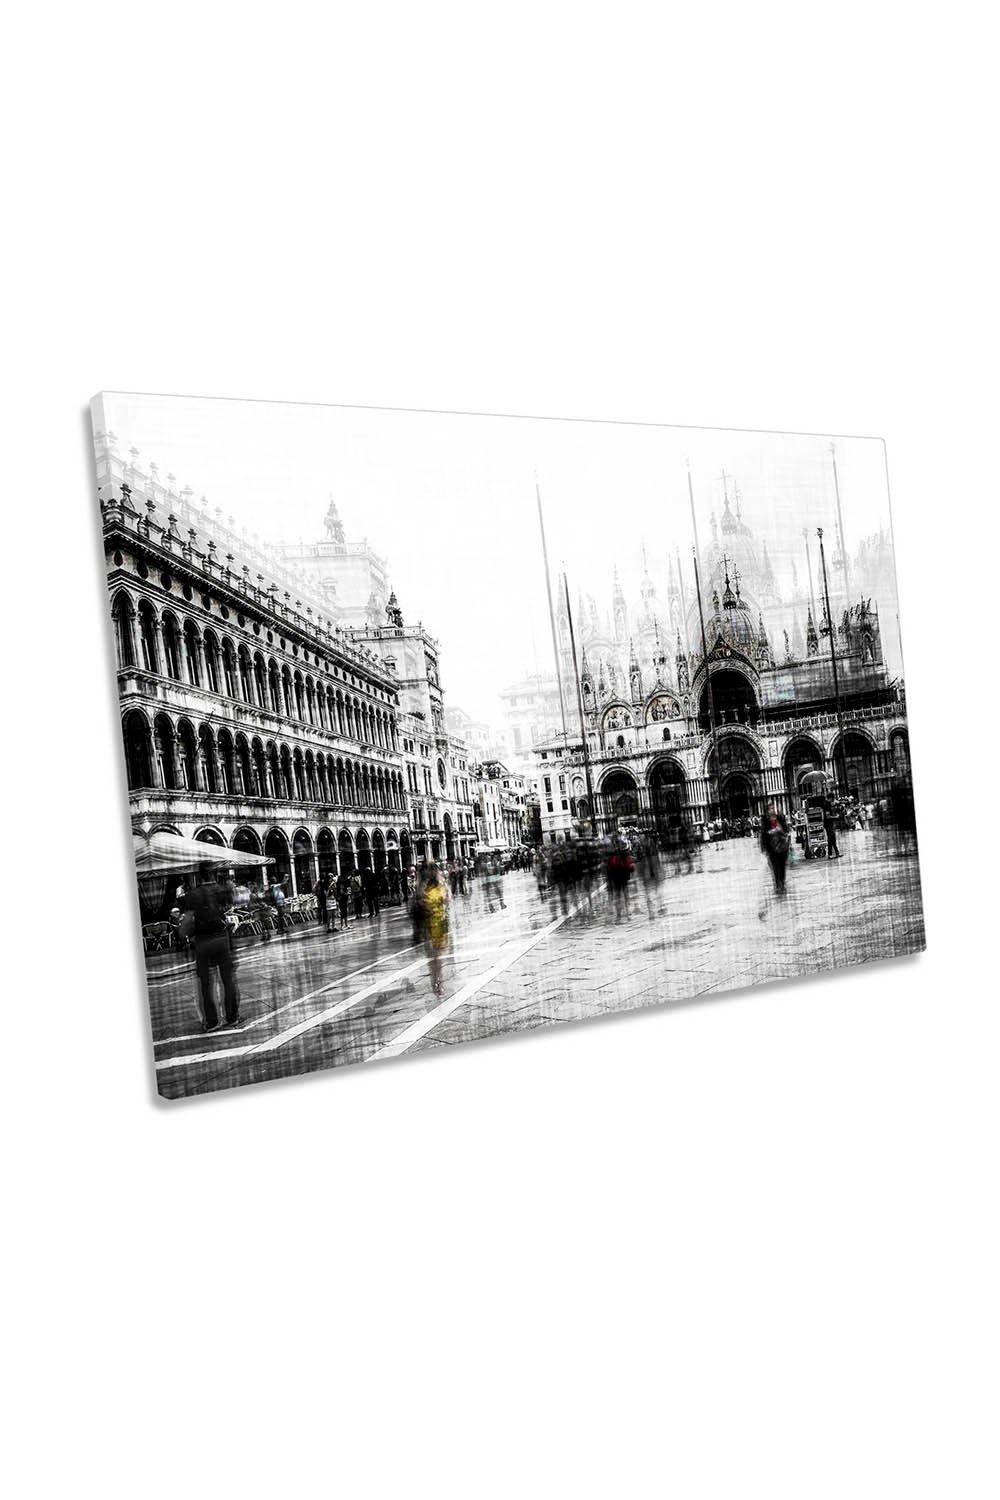 Piazza San Marco Venice Italy City Abstract Canvas Wall Art Picture Print